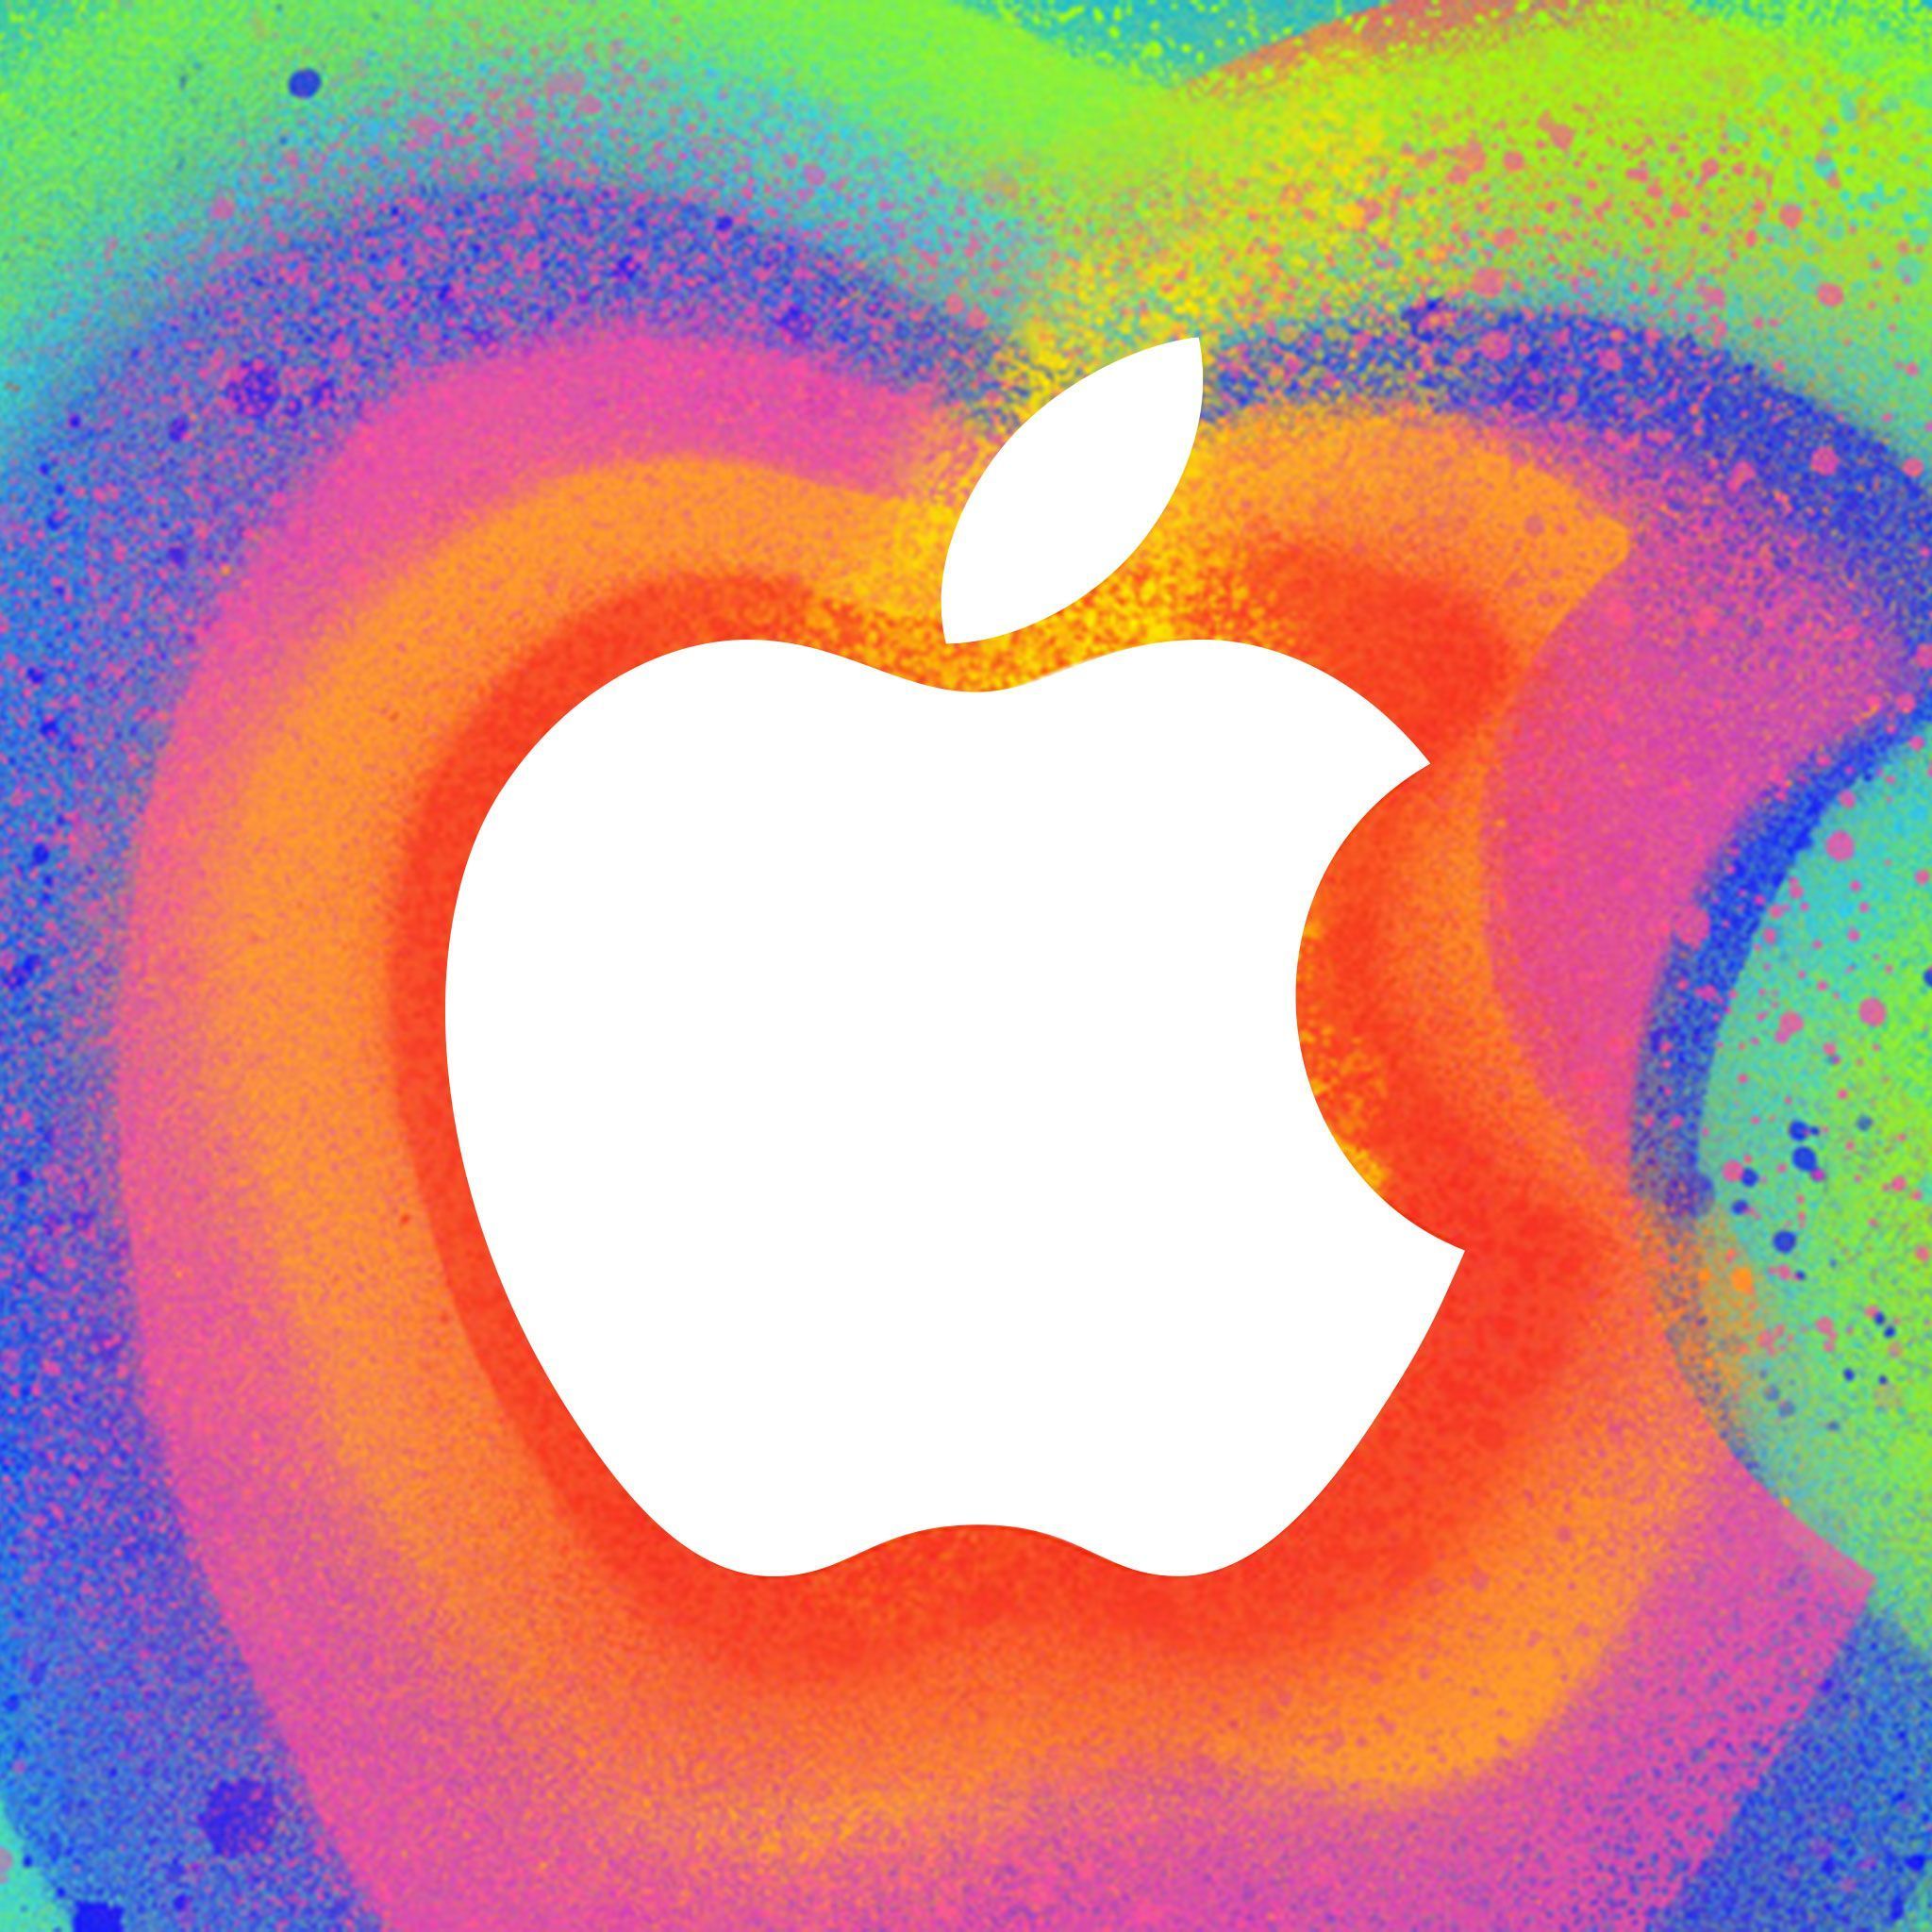 Updated Apple iPad and Mac event wallpaper | iMore